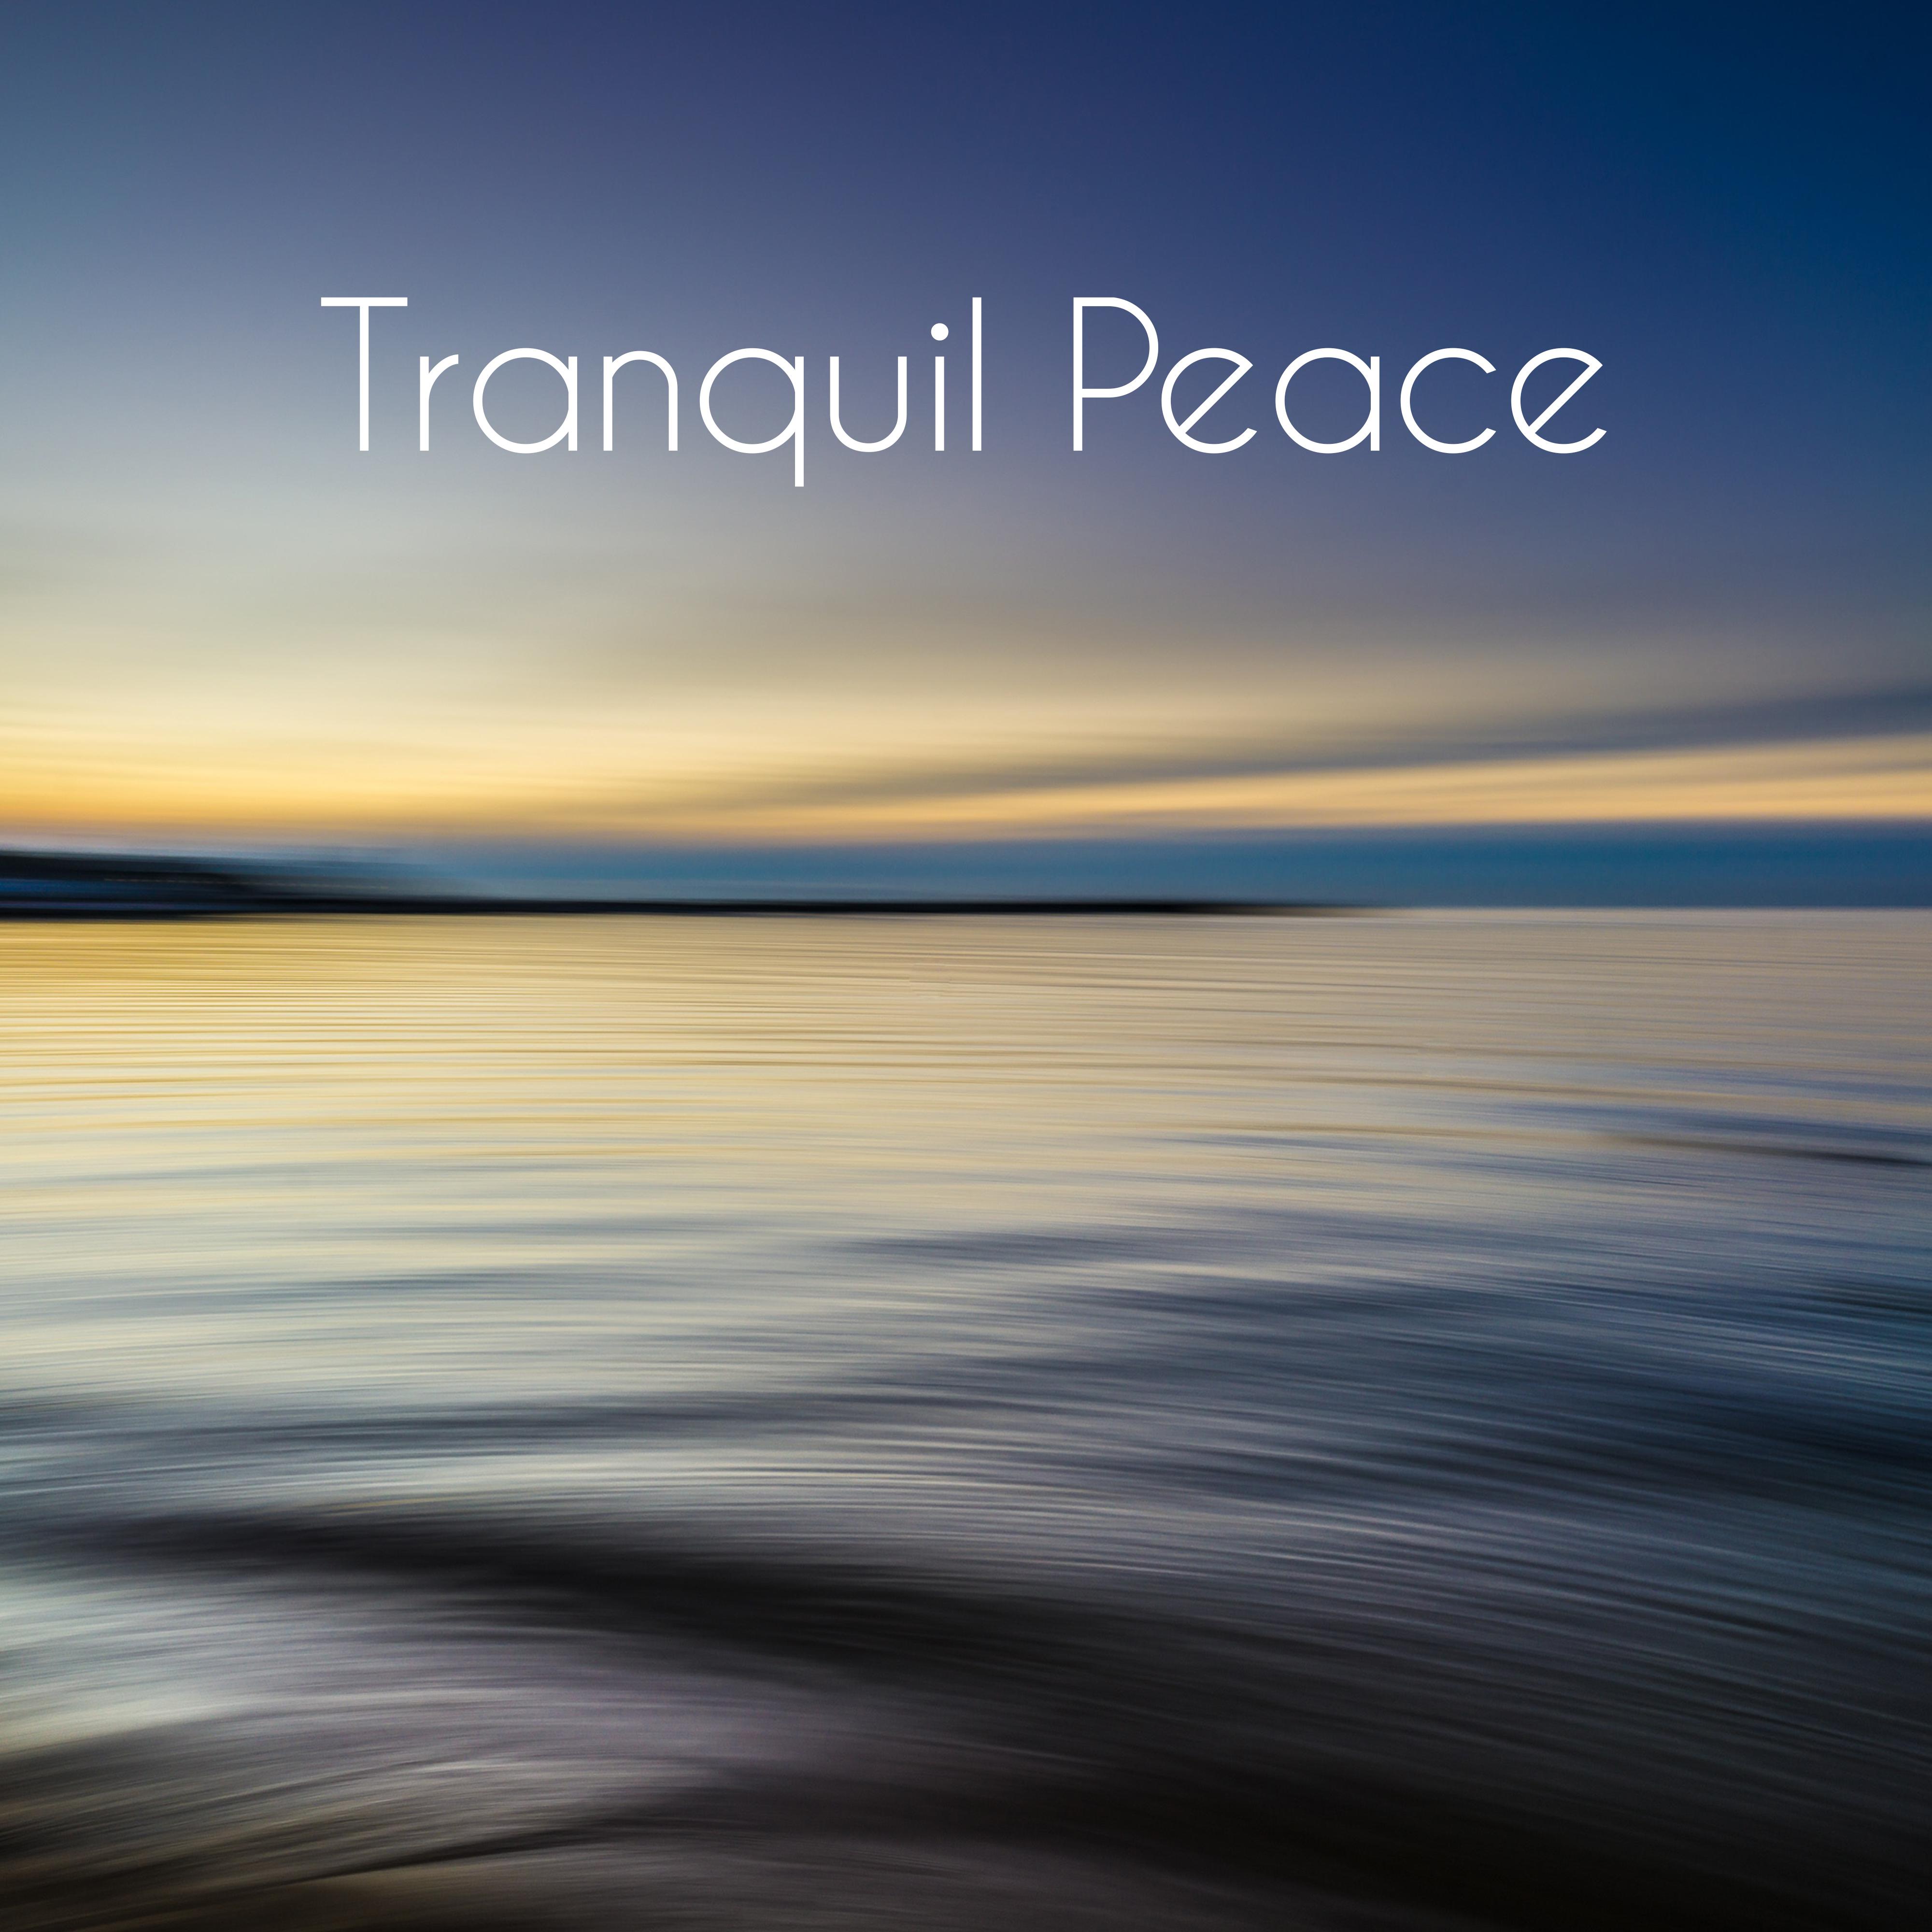 Tranquil Peace  New Age Music for Relaxation, Meditation, Deeper Sleep, Reiki, Zen Lounge, Pure Therapy, Spiritual Tracks to Rest, Ambient Yoga 2019